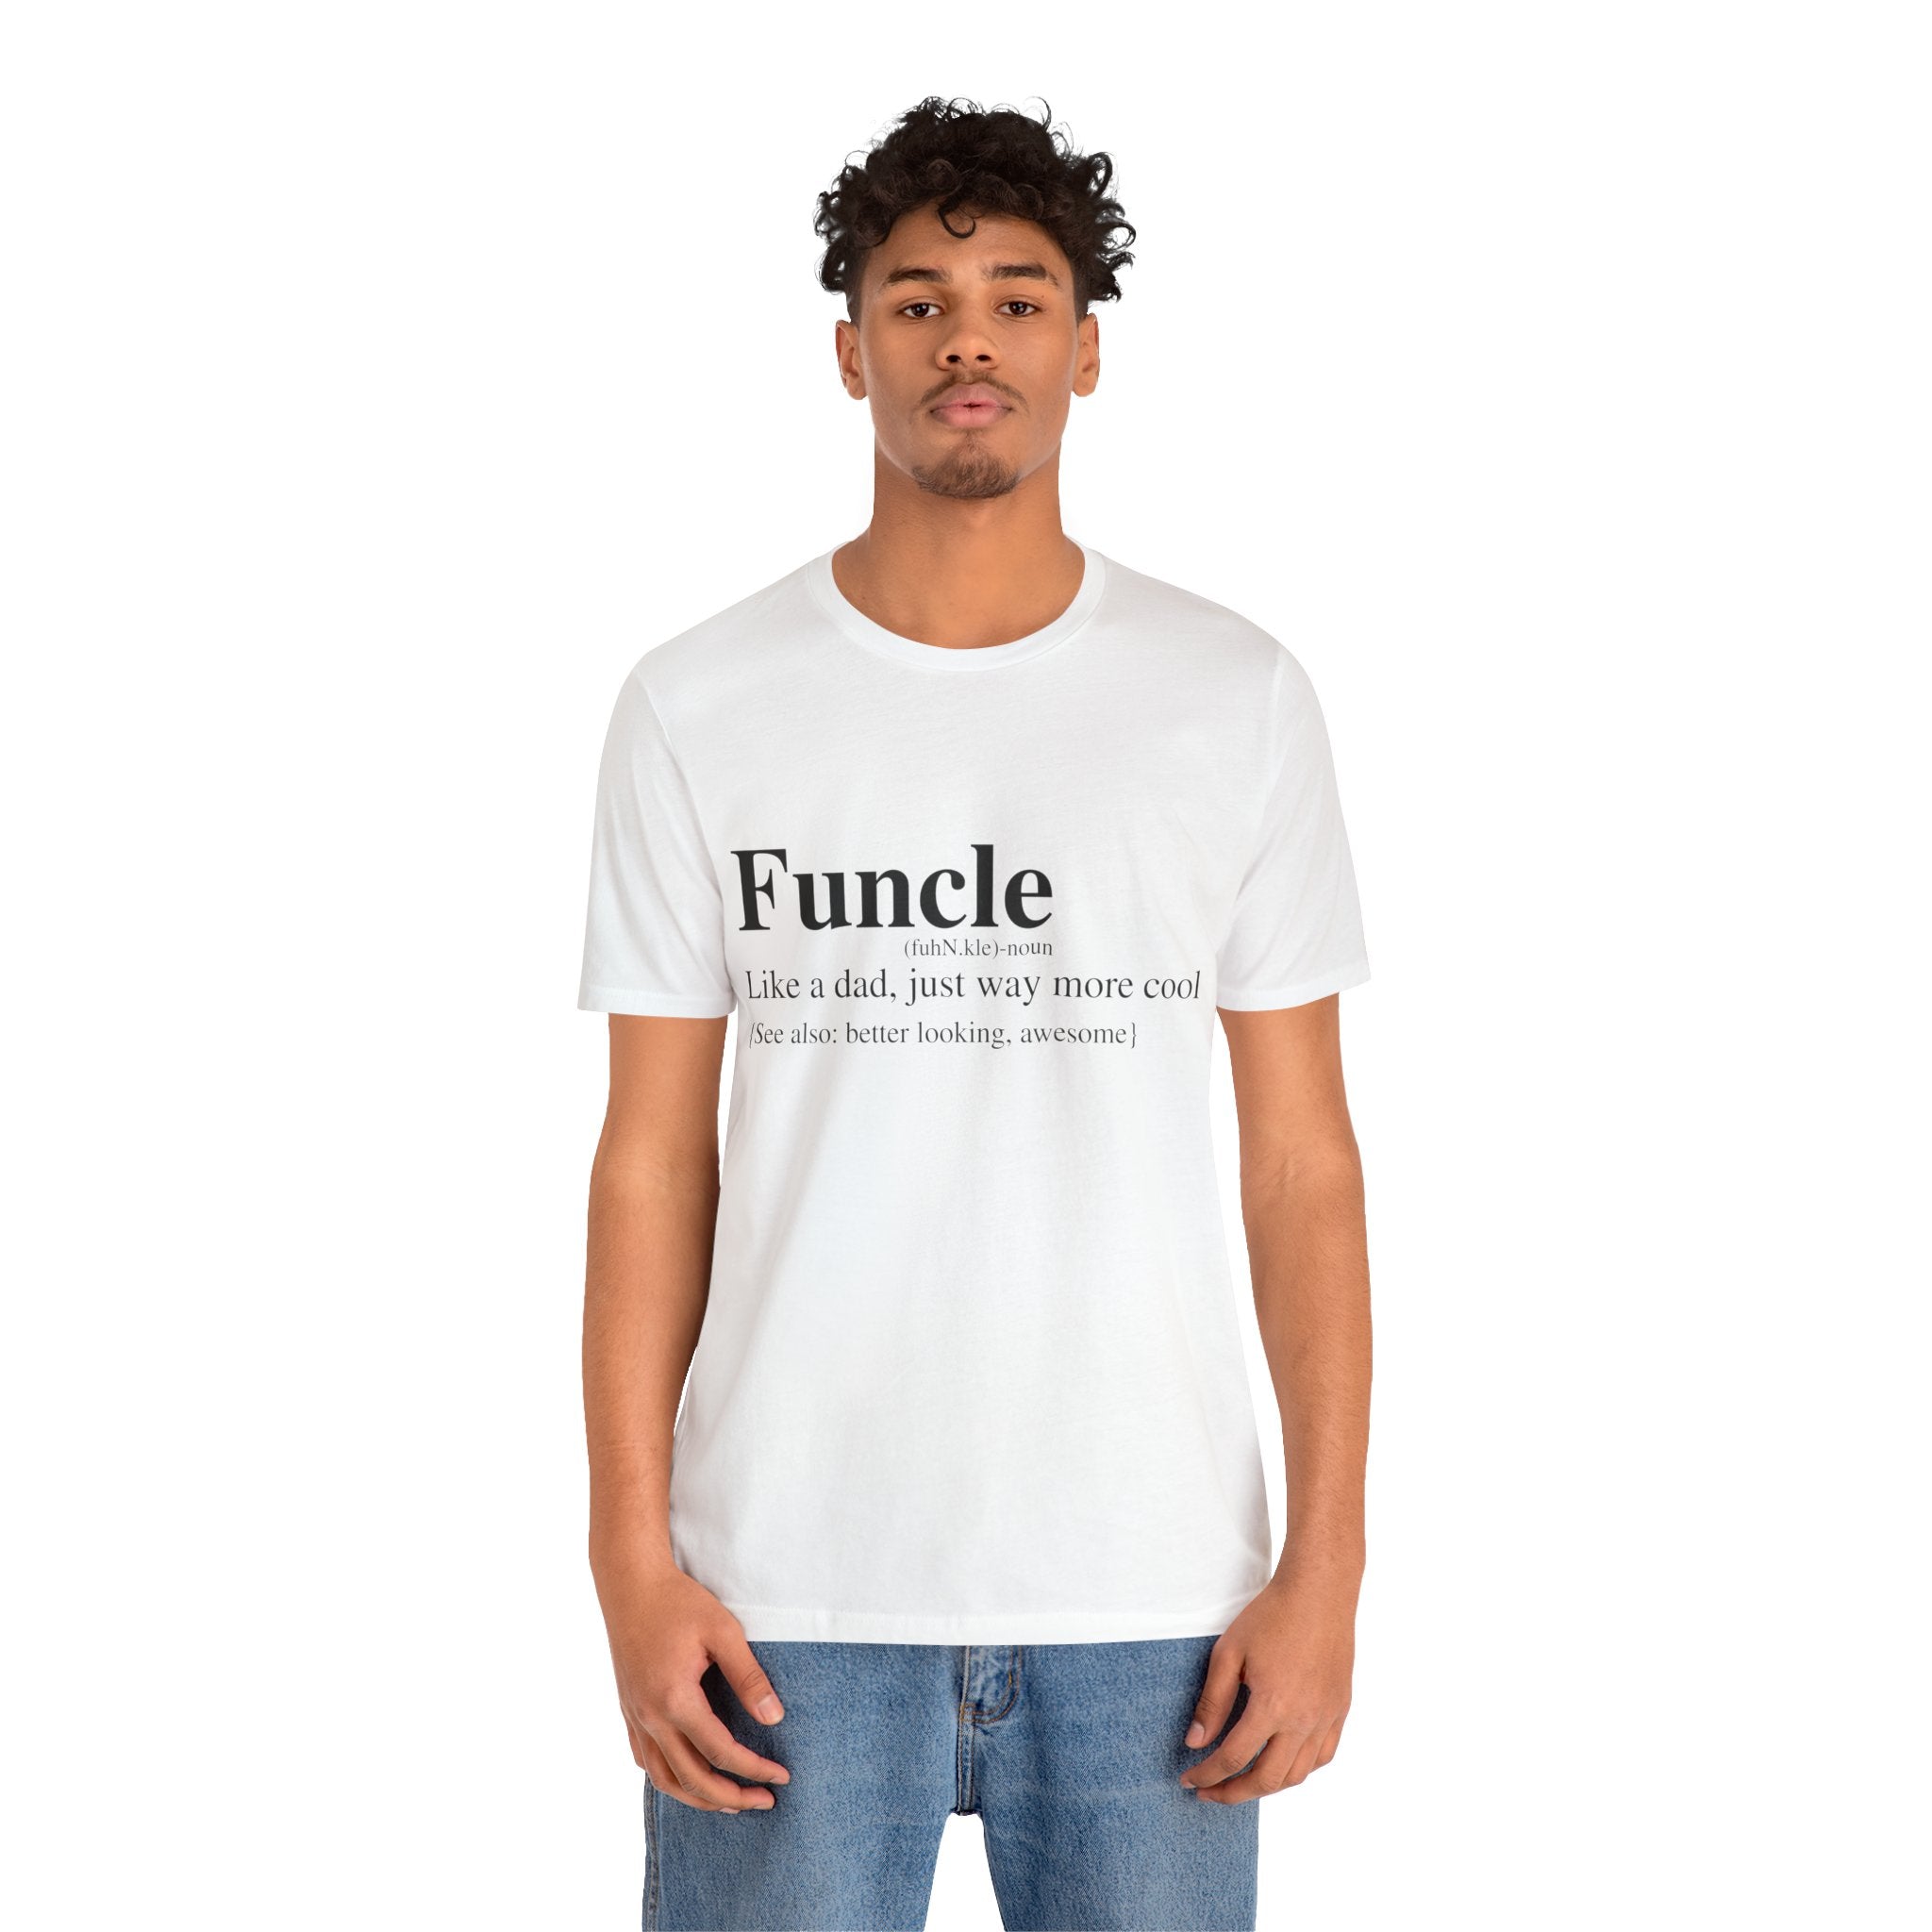 Young man in a Funcle T-Shirt displaying the text "funcle: like a dad, just way more cool. like better looking, awesome!" printed on it.